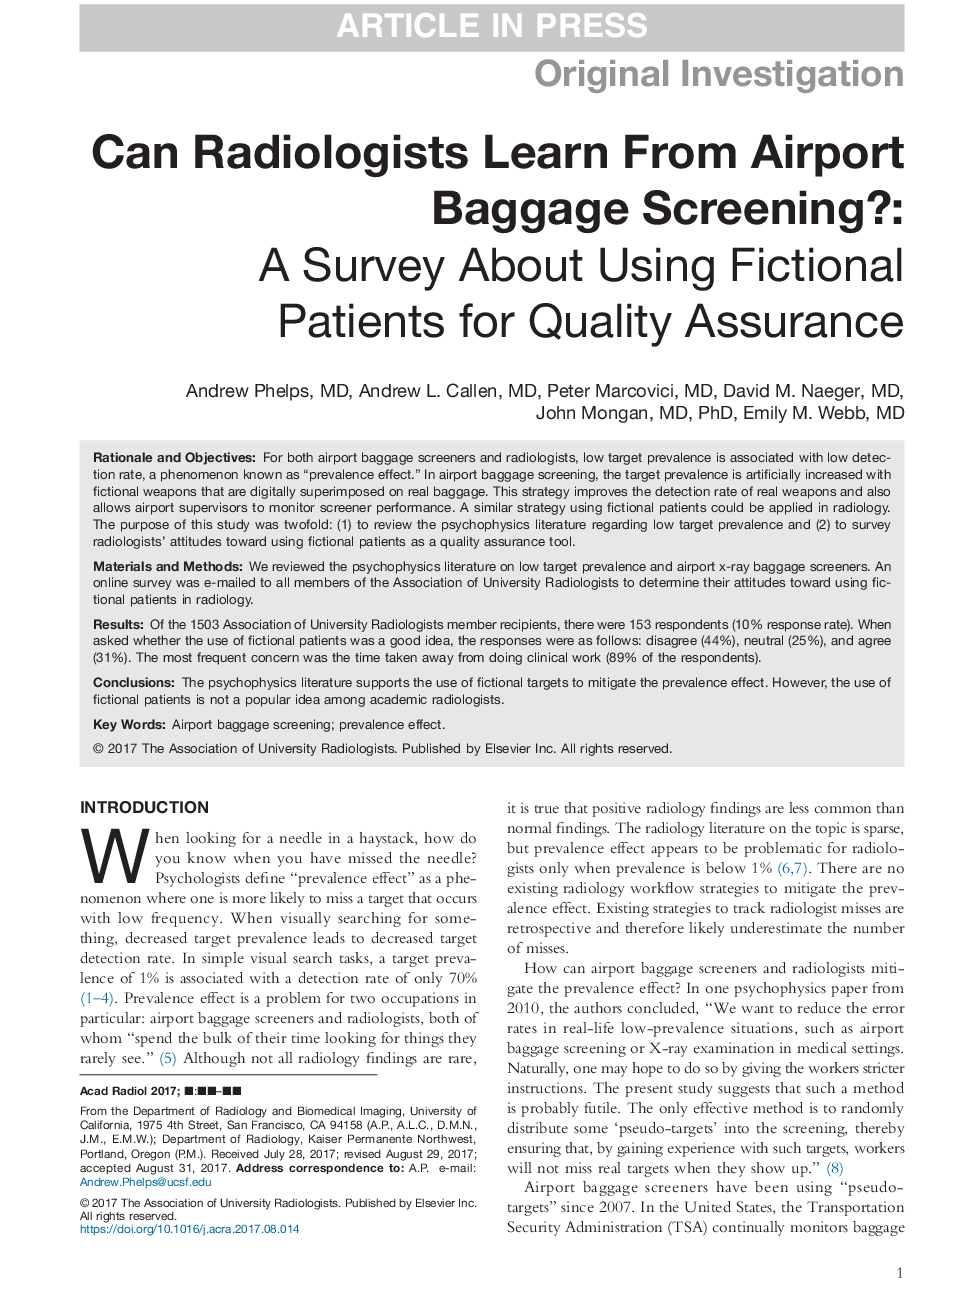 Can Radiologists Learn From Airport Baggage Screening?